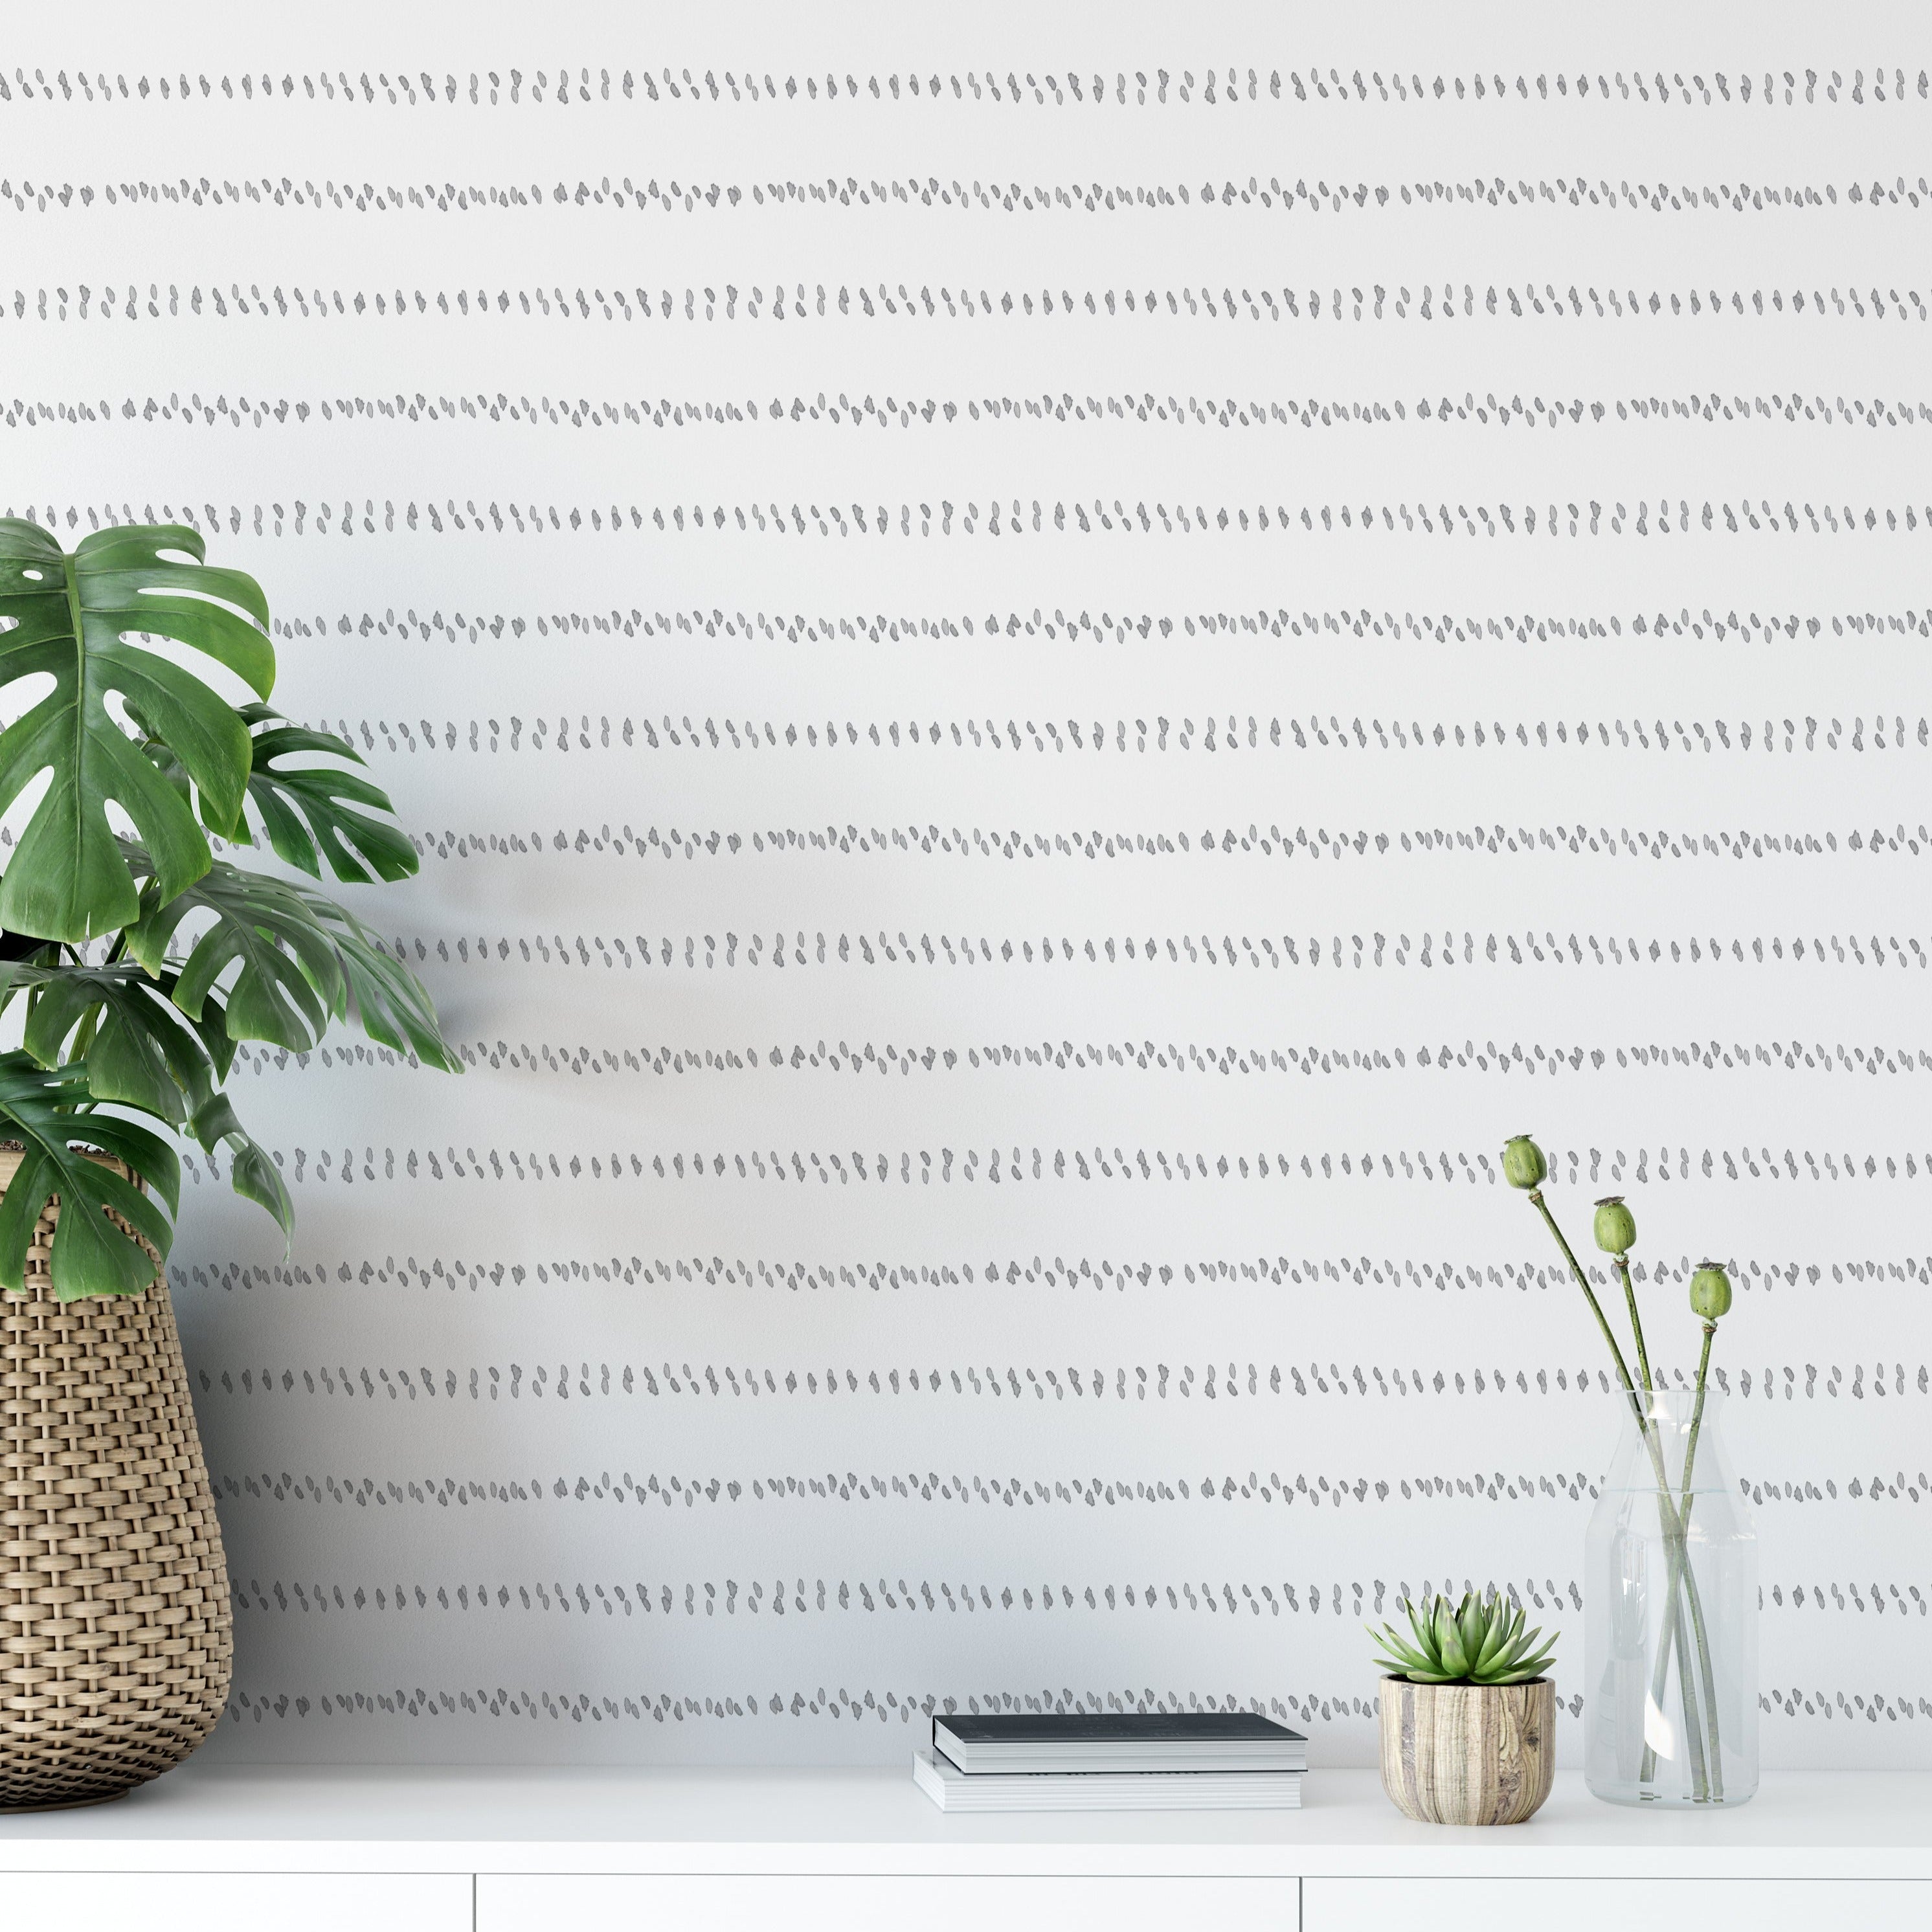 A modern room featuring the Watercolour Minimal Wallpaper II, with subtle gray watercolor dashes forming horizontal lines on a white wall, providing a serene and sophisticated backdrop that complements the contemporary decor.